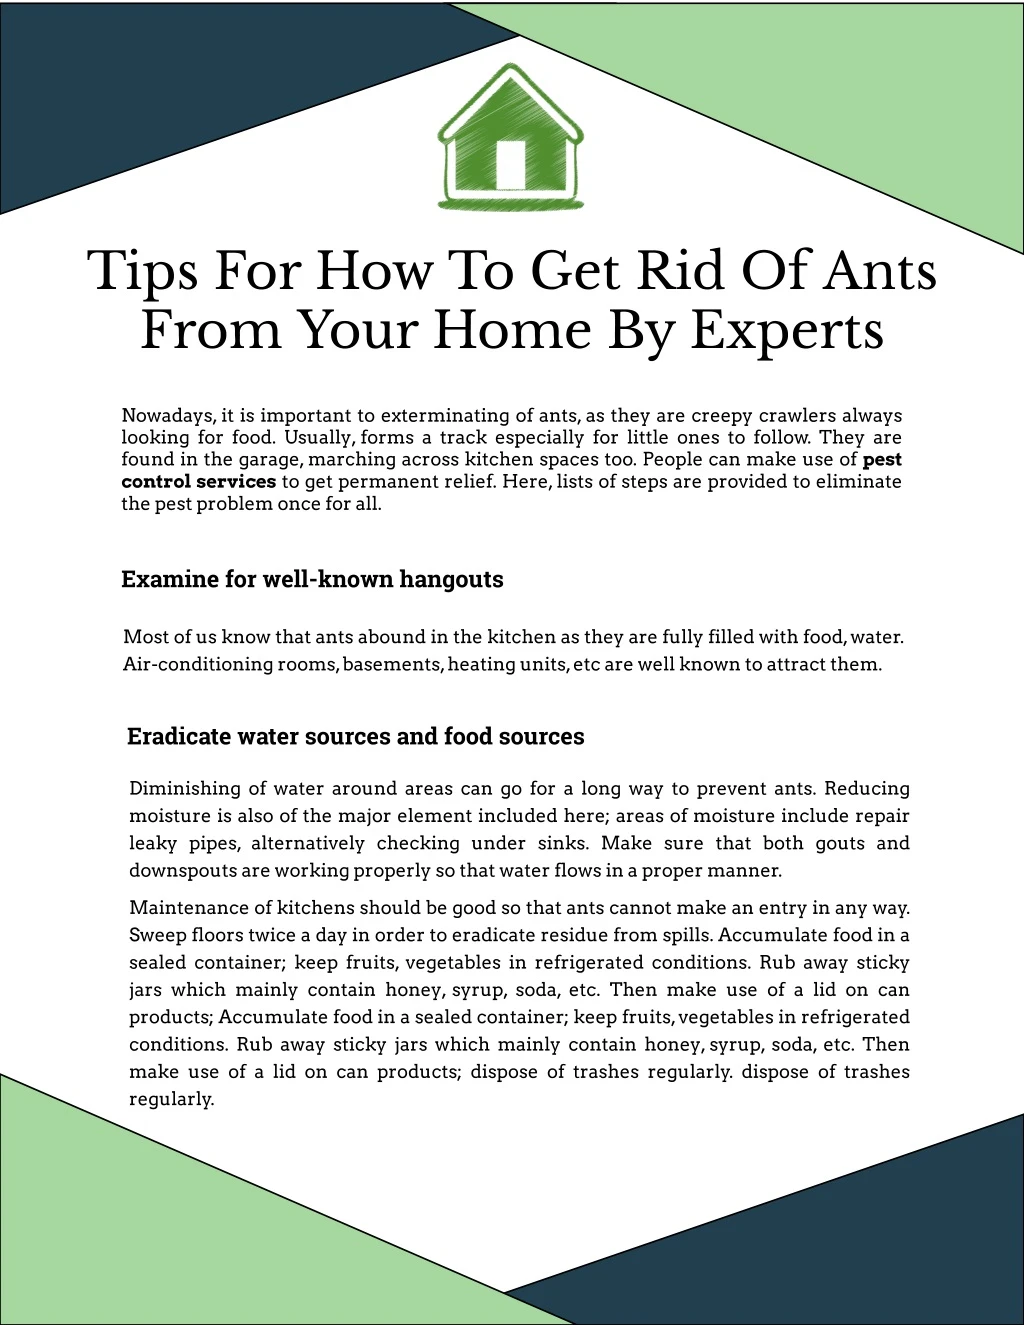 tips for how to get rid of ants from your